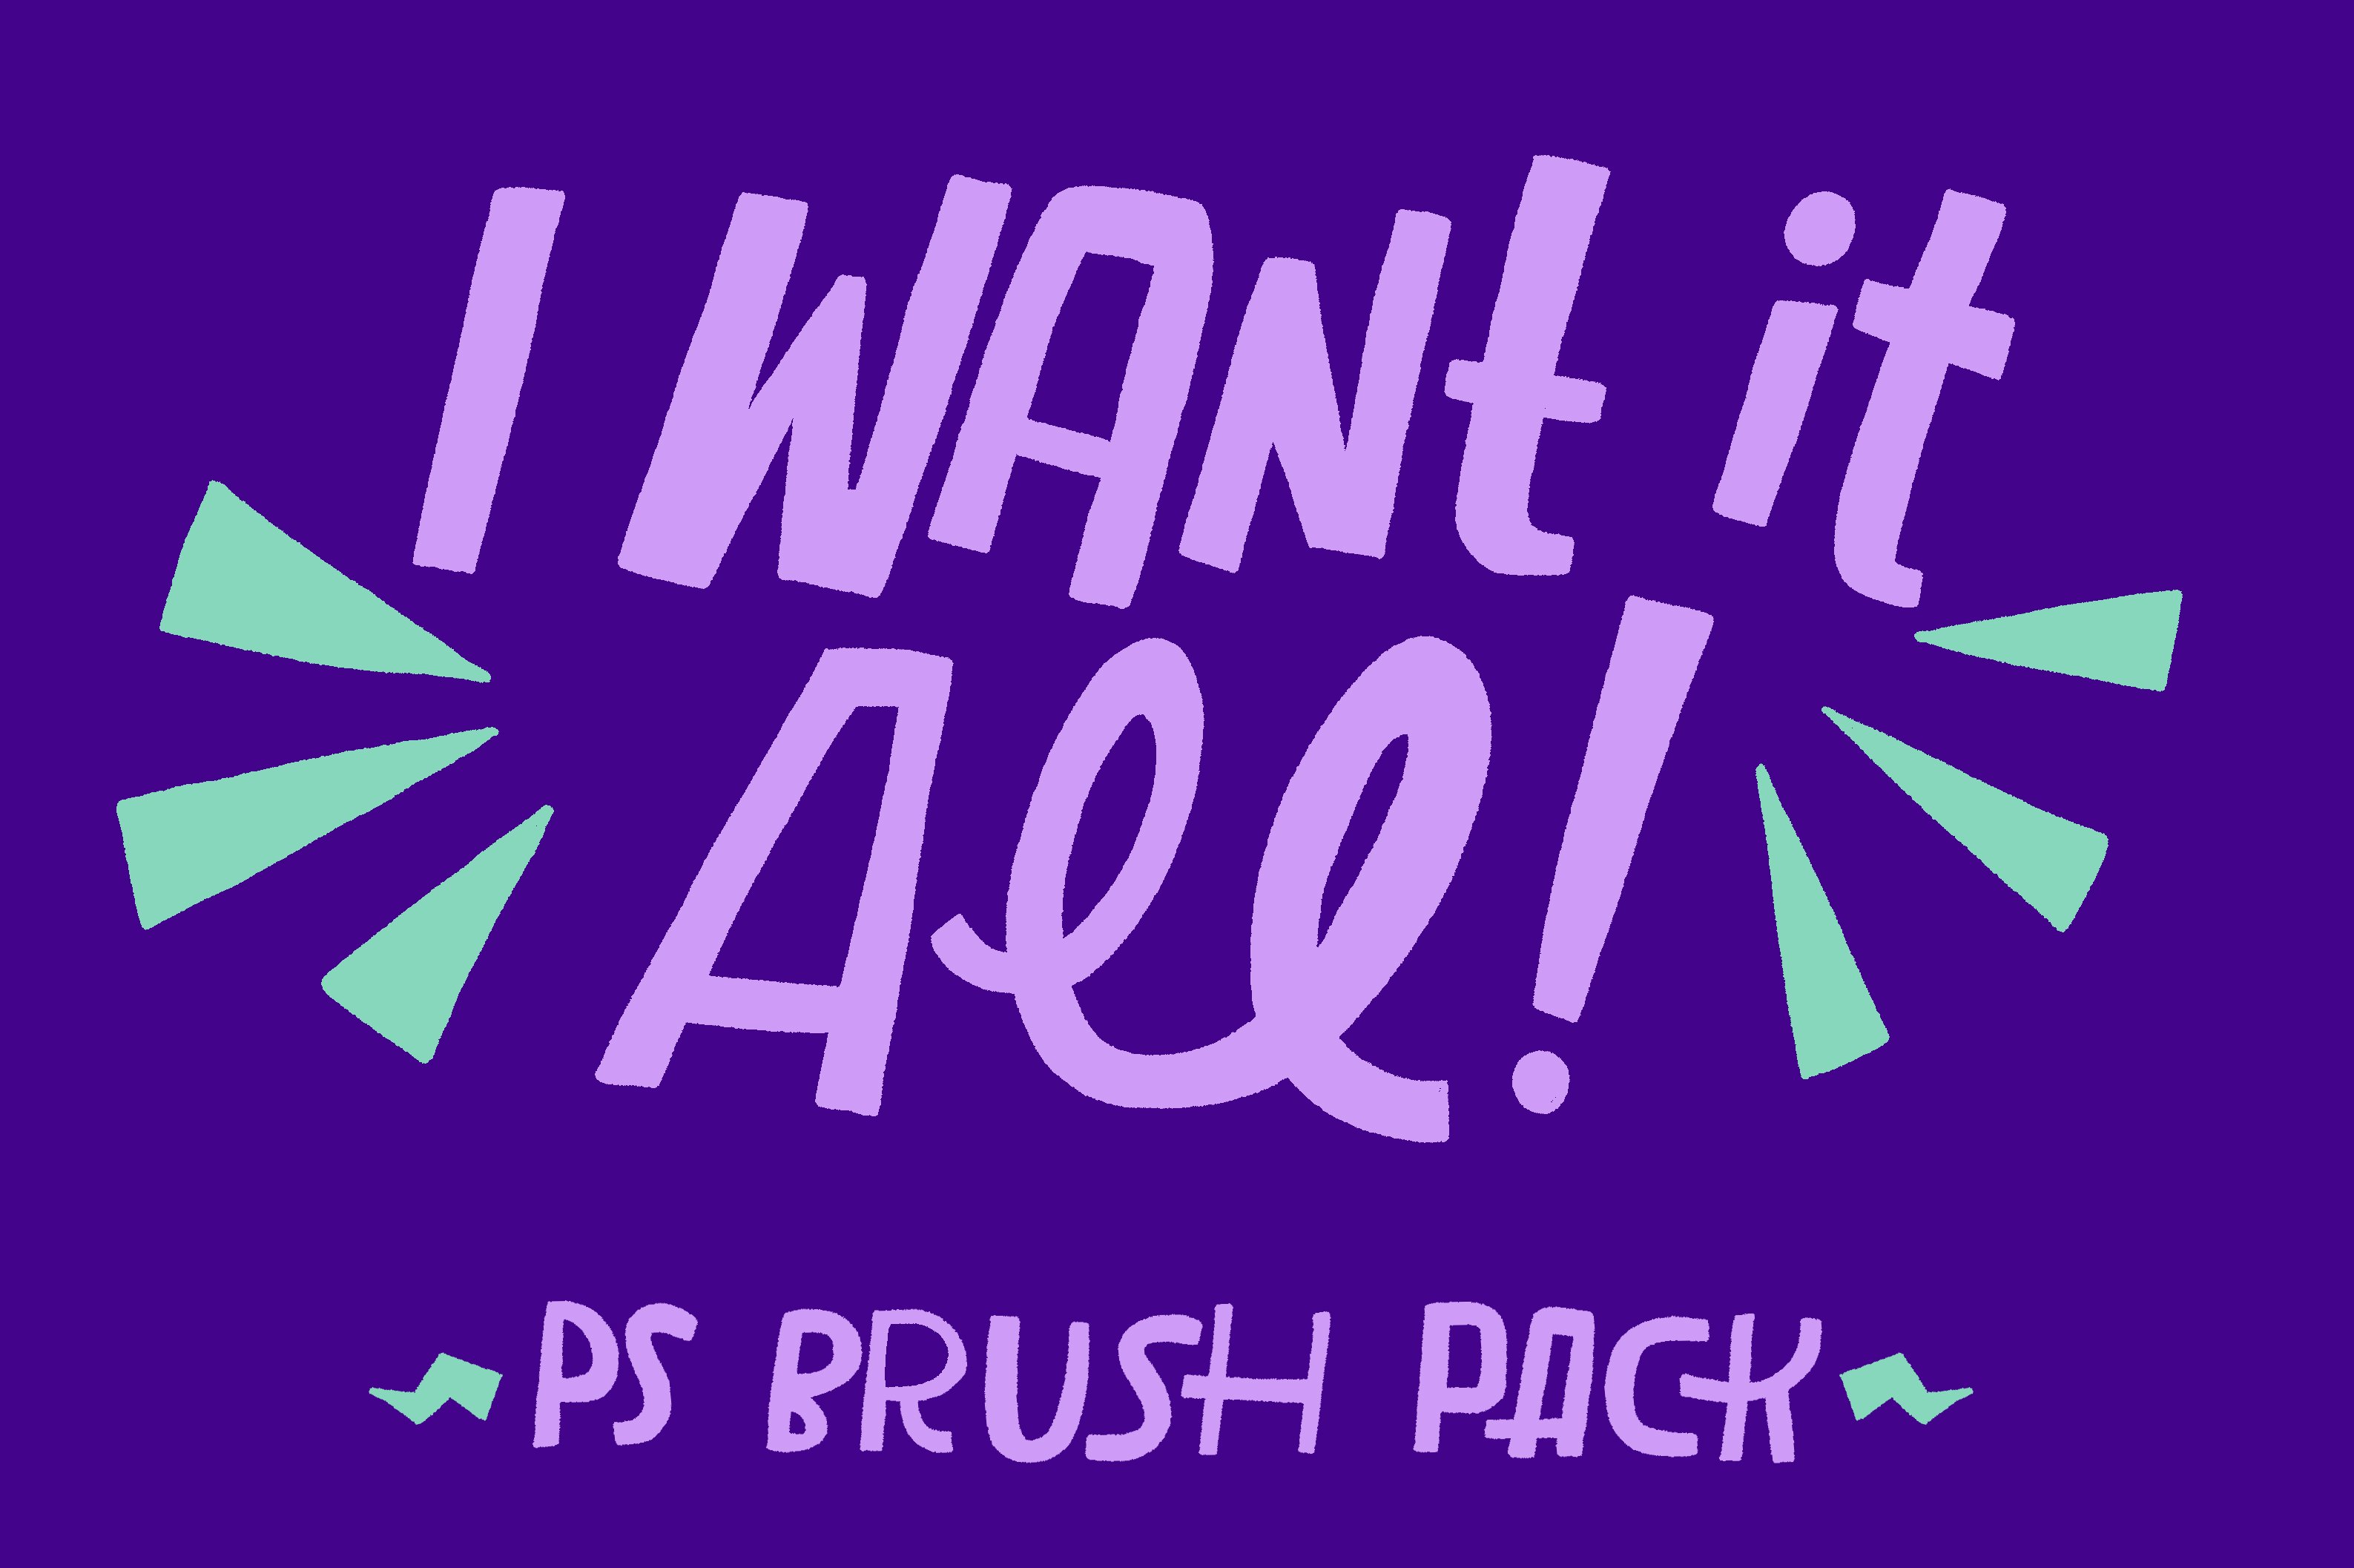 I Want It All! PS Brush Bundlecover image.